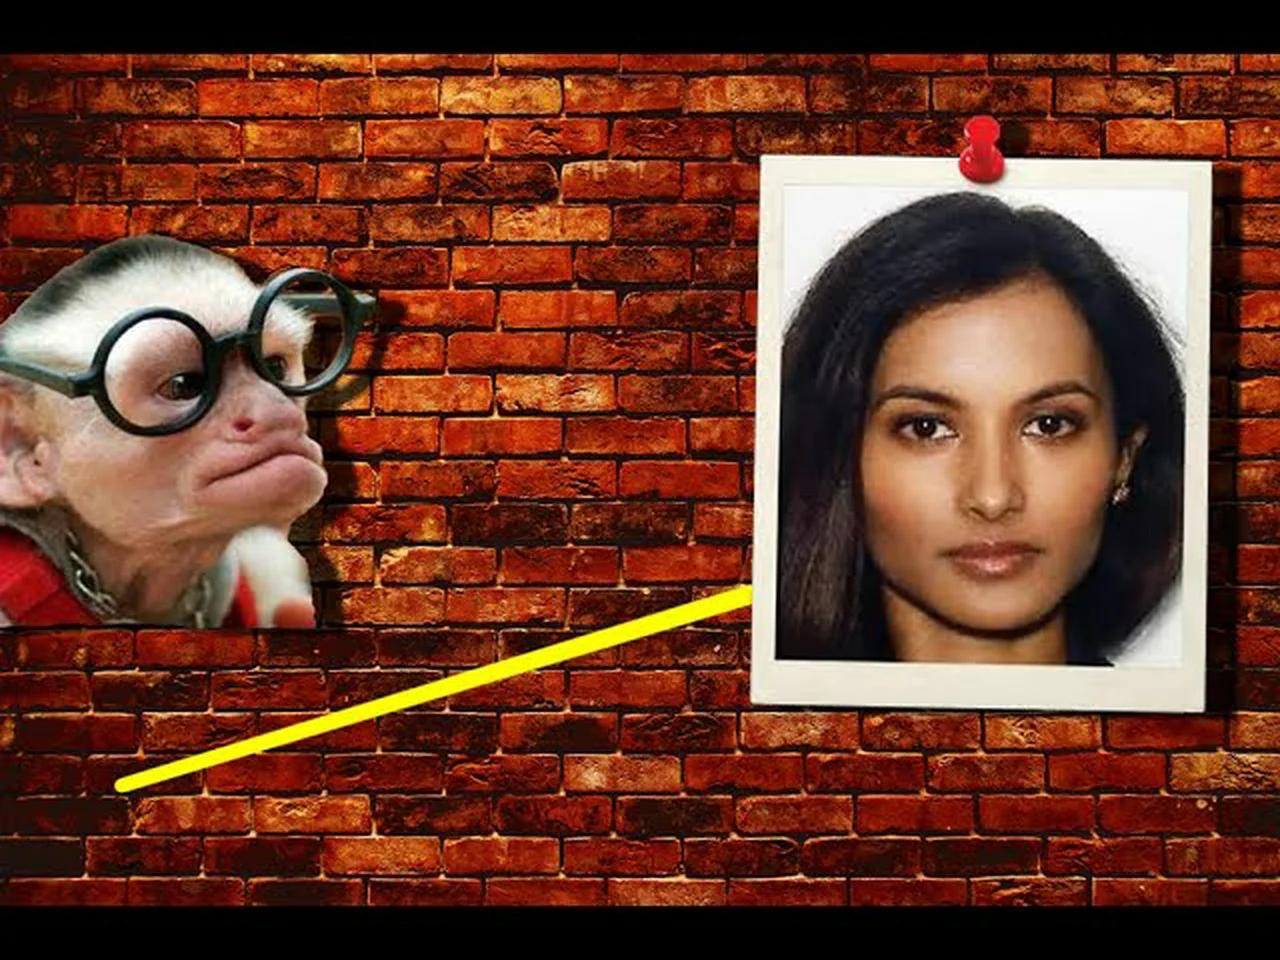 ROHINIE BISESAR - ANOTHER BRICK IN THE WALL - WEAPONIZED RF AND MOTIVELESS CRIME